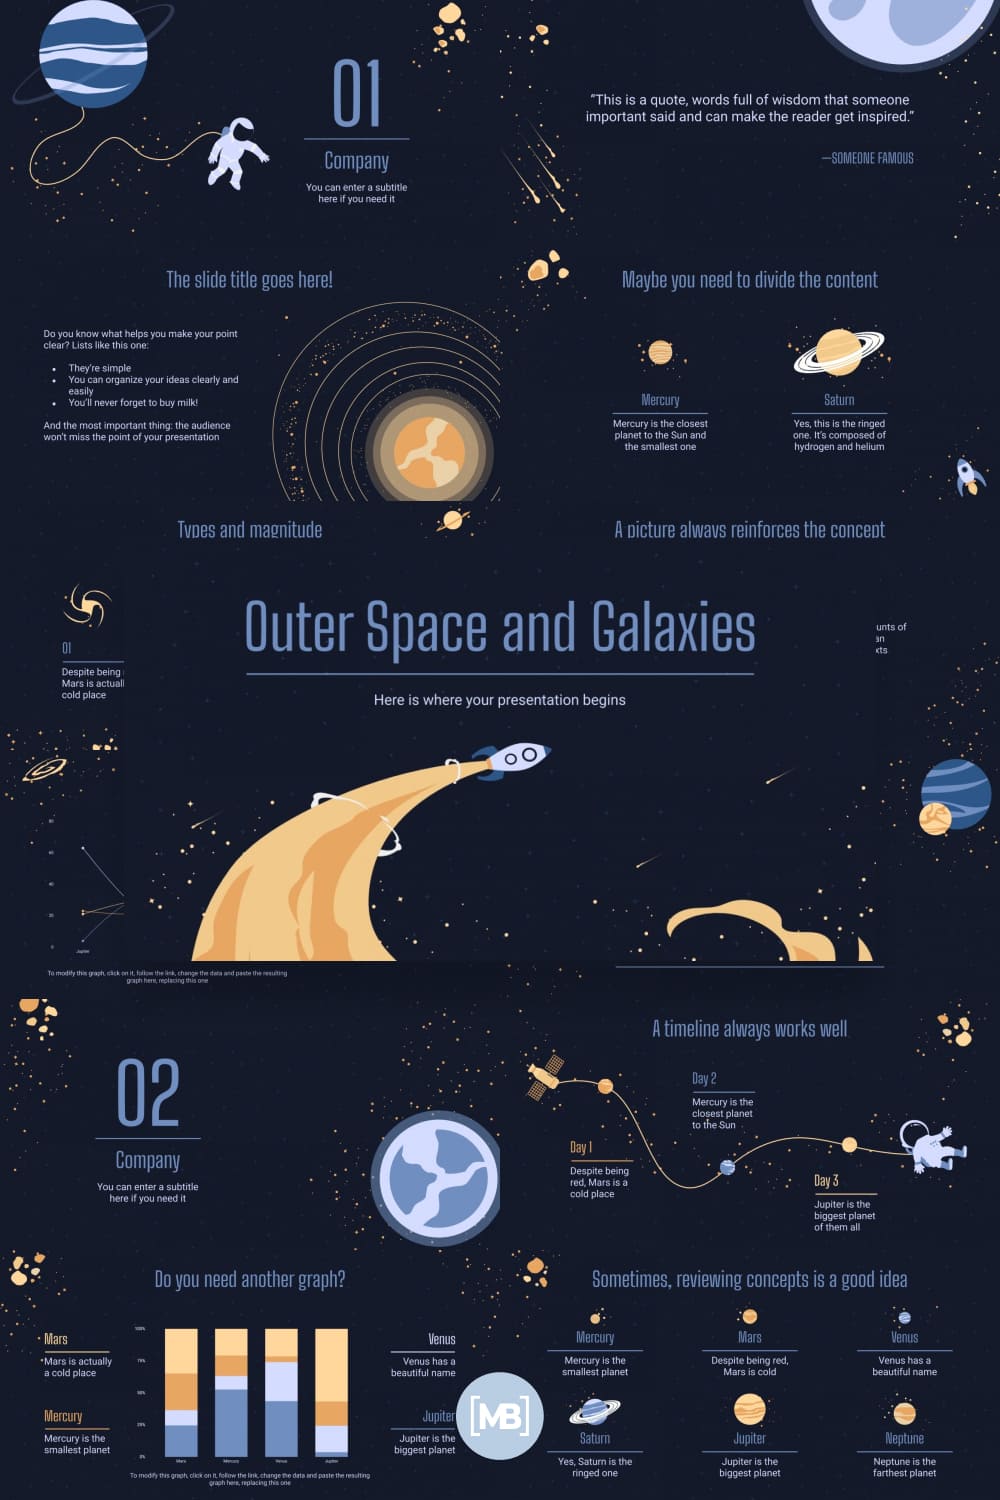 Outer space and galaxies.